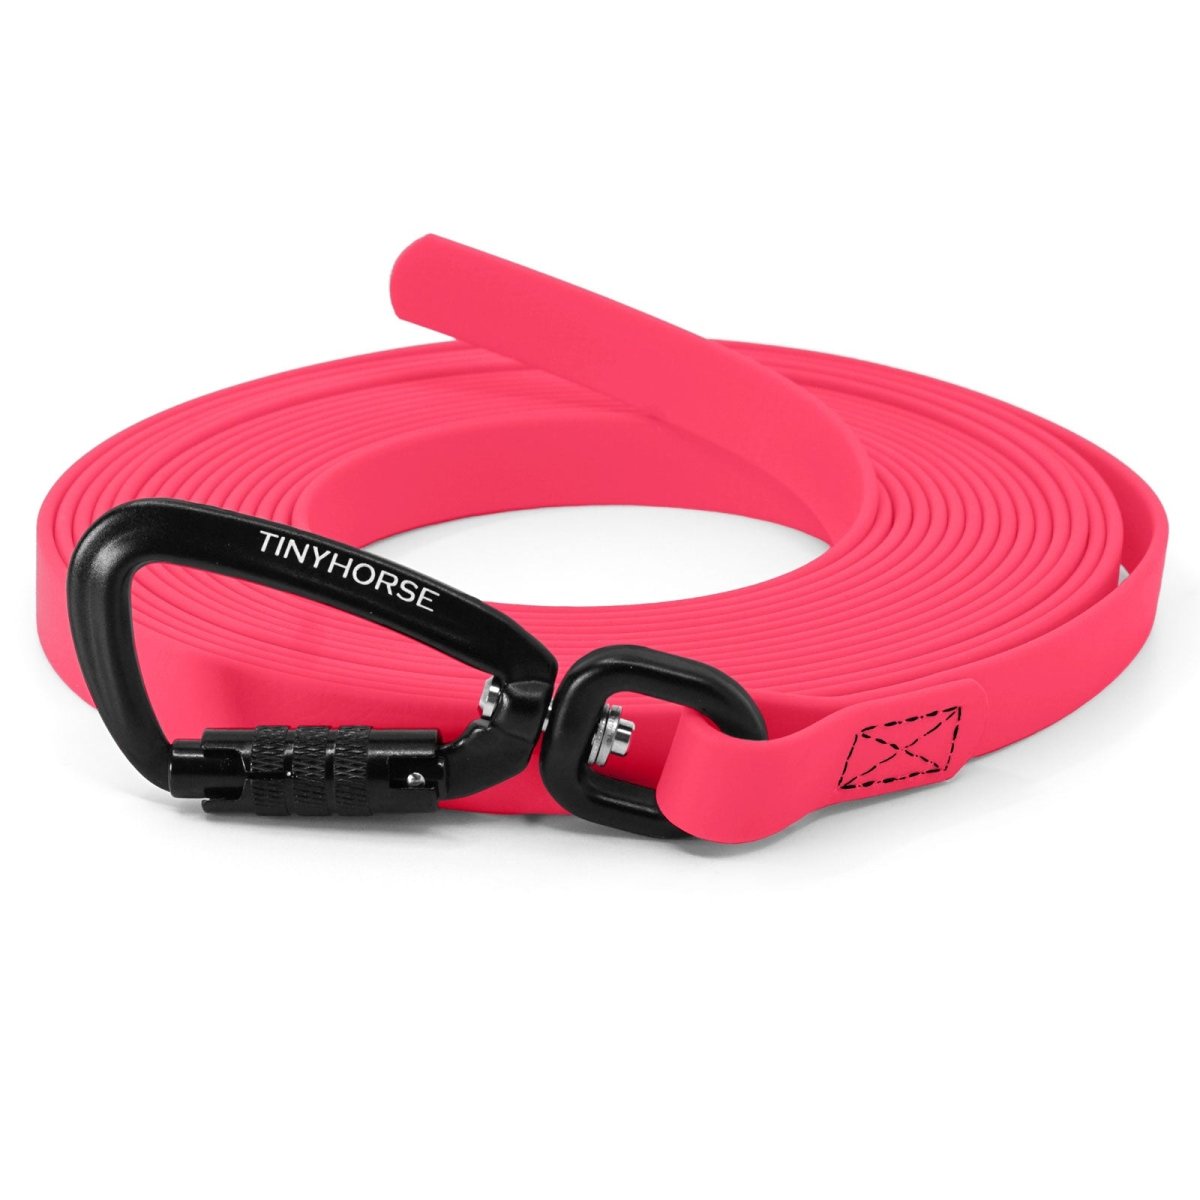 A neon pink, handle-less long line with an auto-locking carabiner